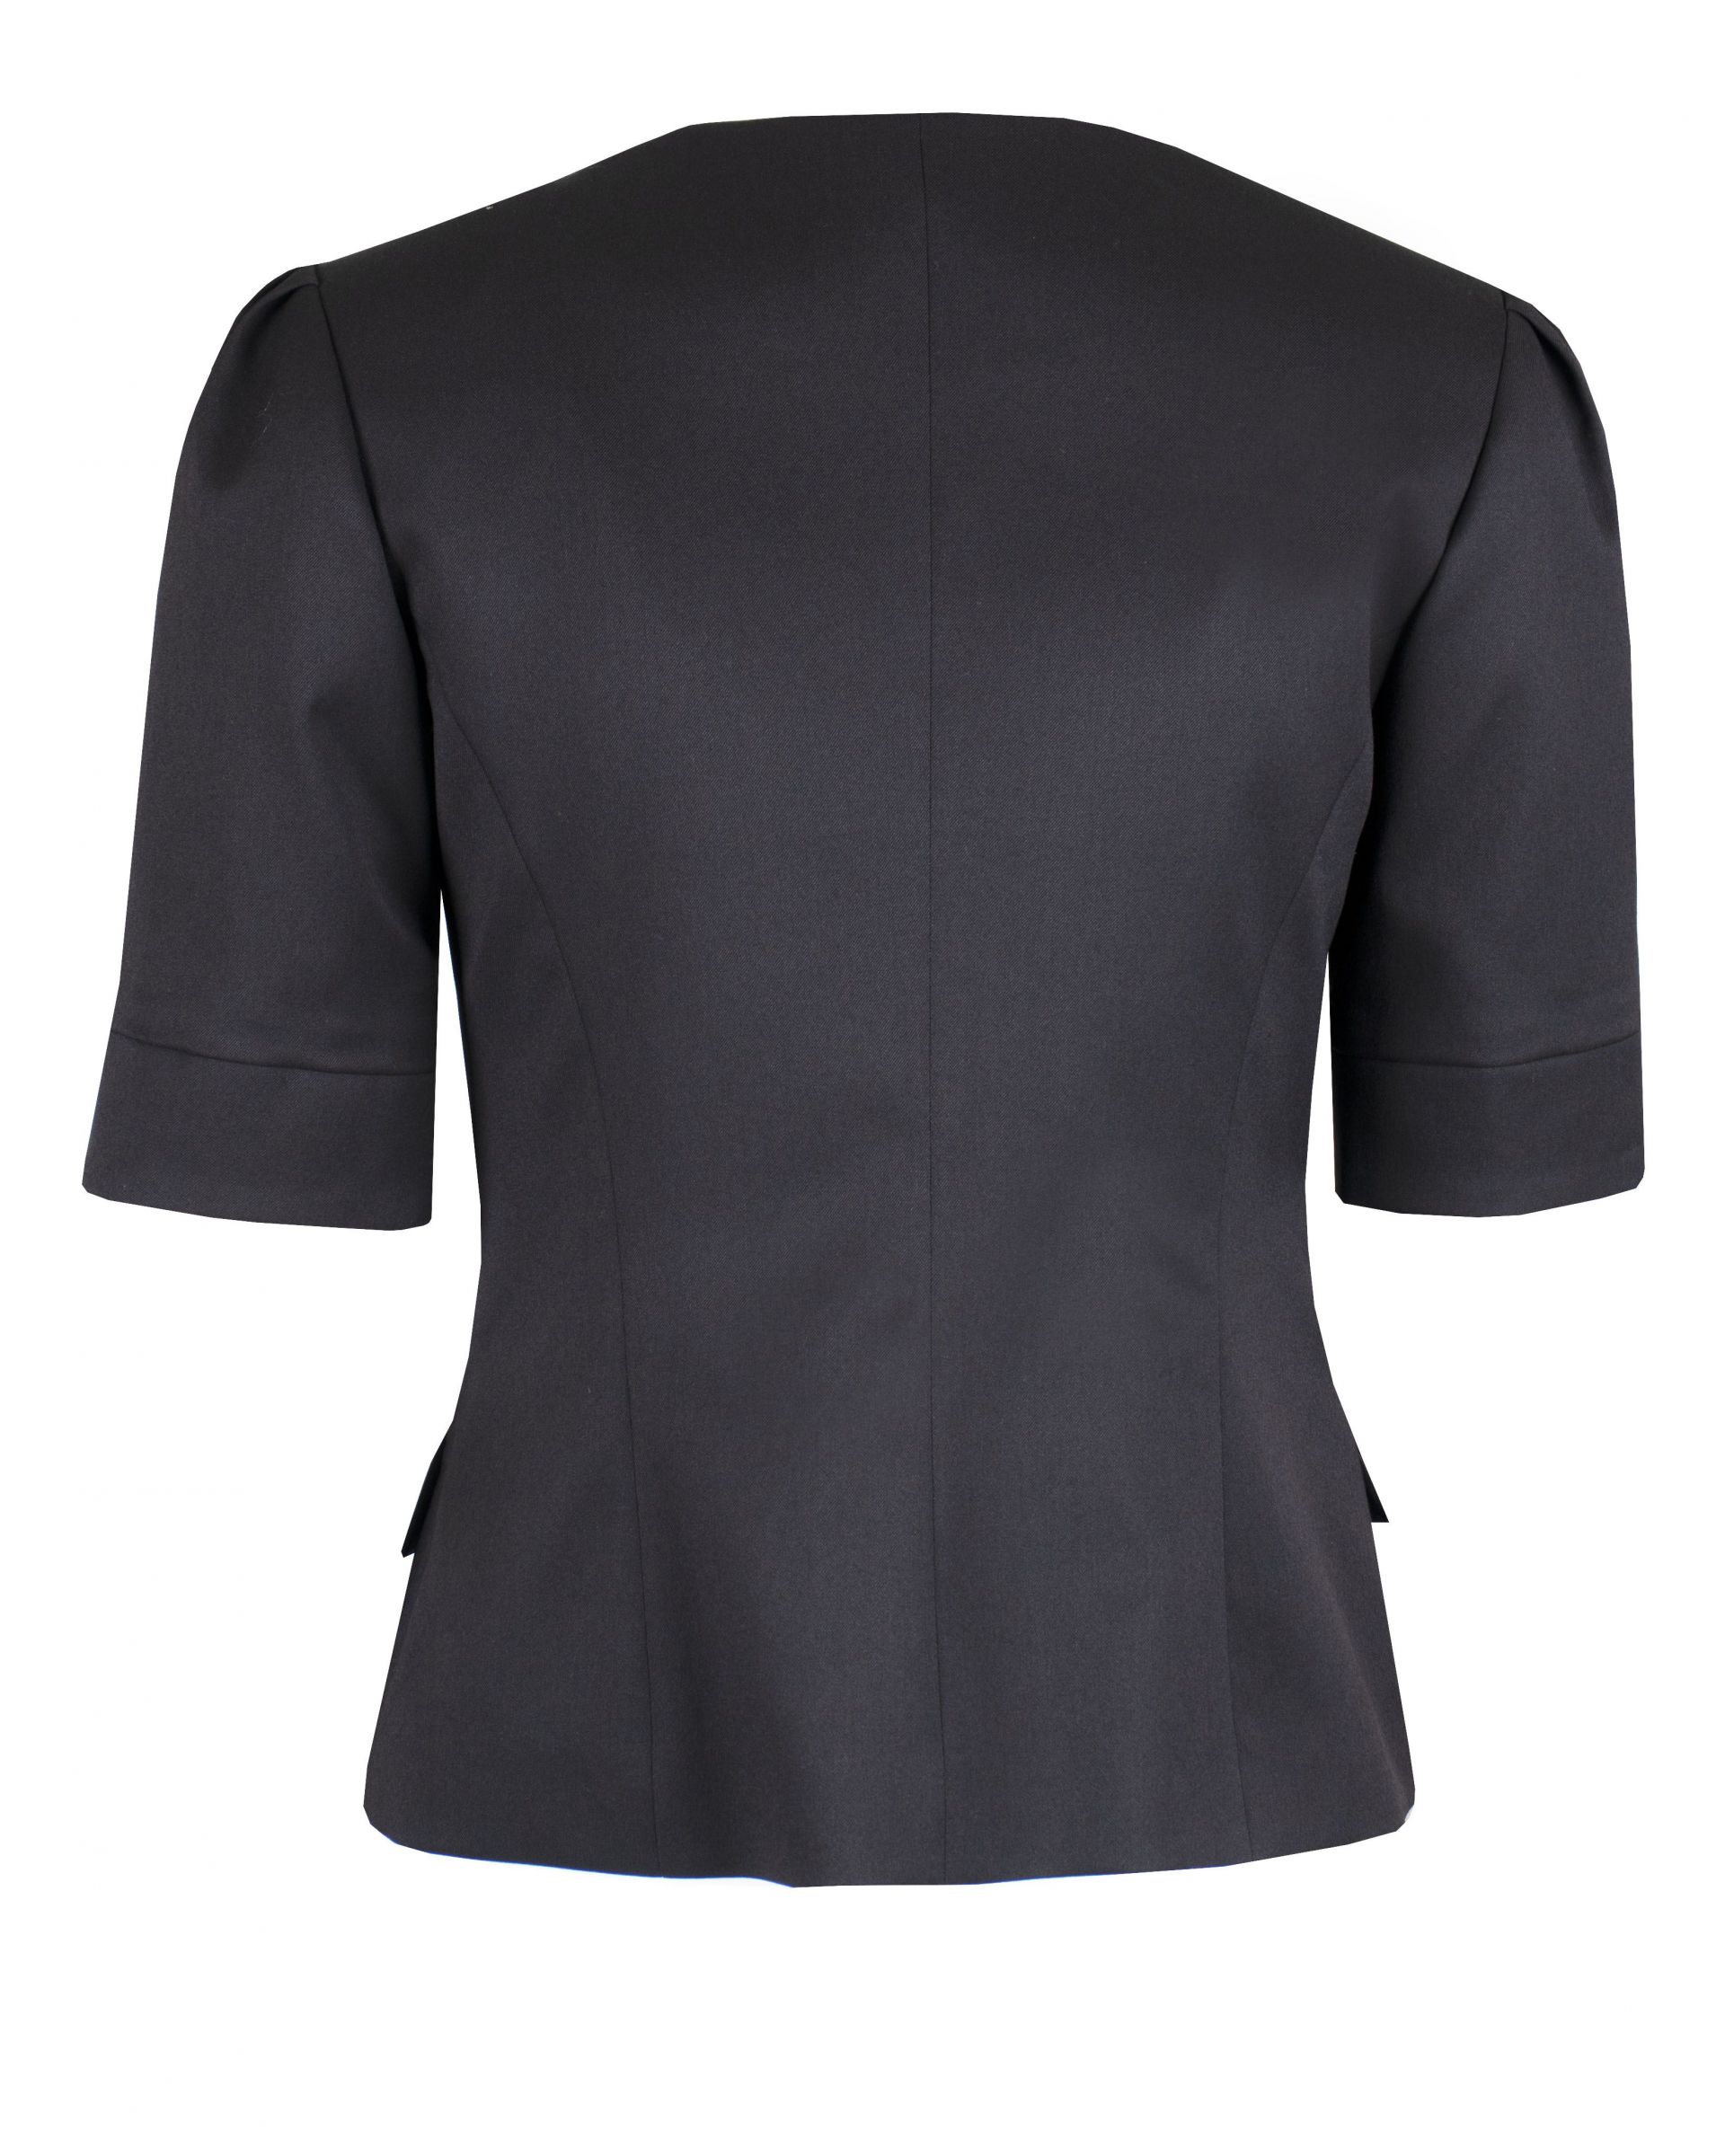 Fitted short-sleeved jacket with round neck, buttoning with three pearl type buttons 1